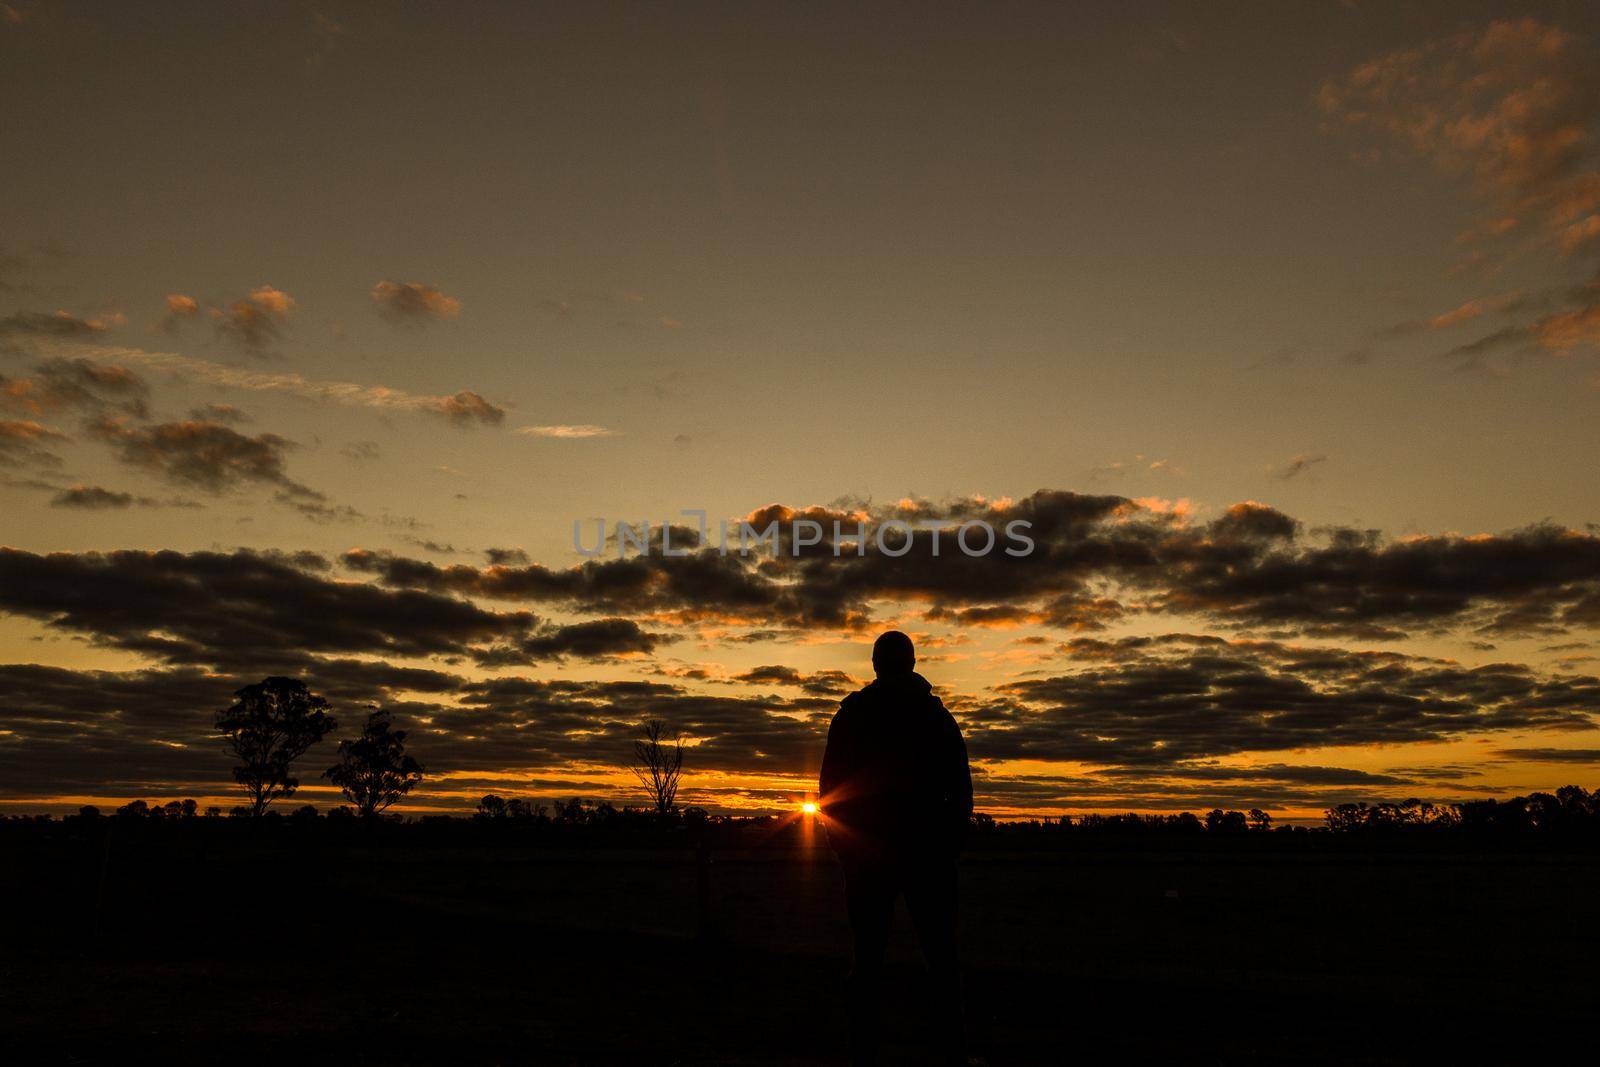 silhouette of young man during sunset in Australia with sillhouettes of trees, Cobram, Victoria, Australia by bettercallcurry